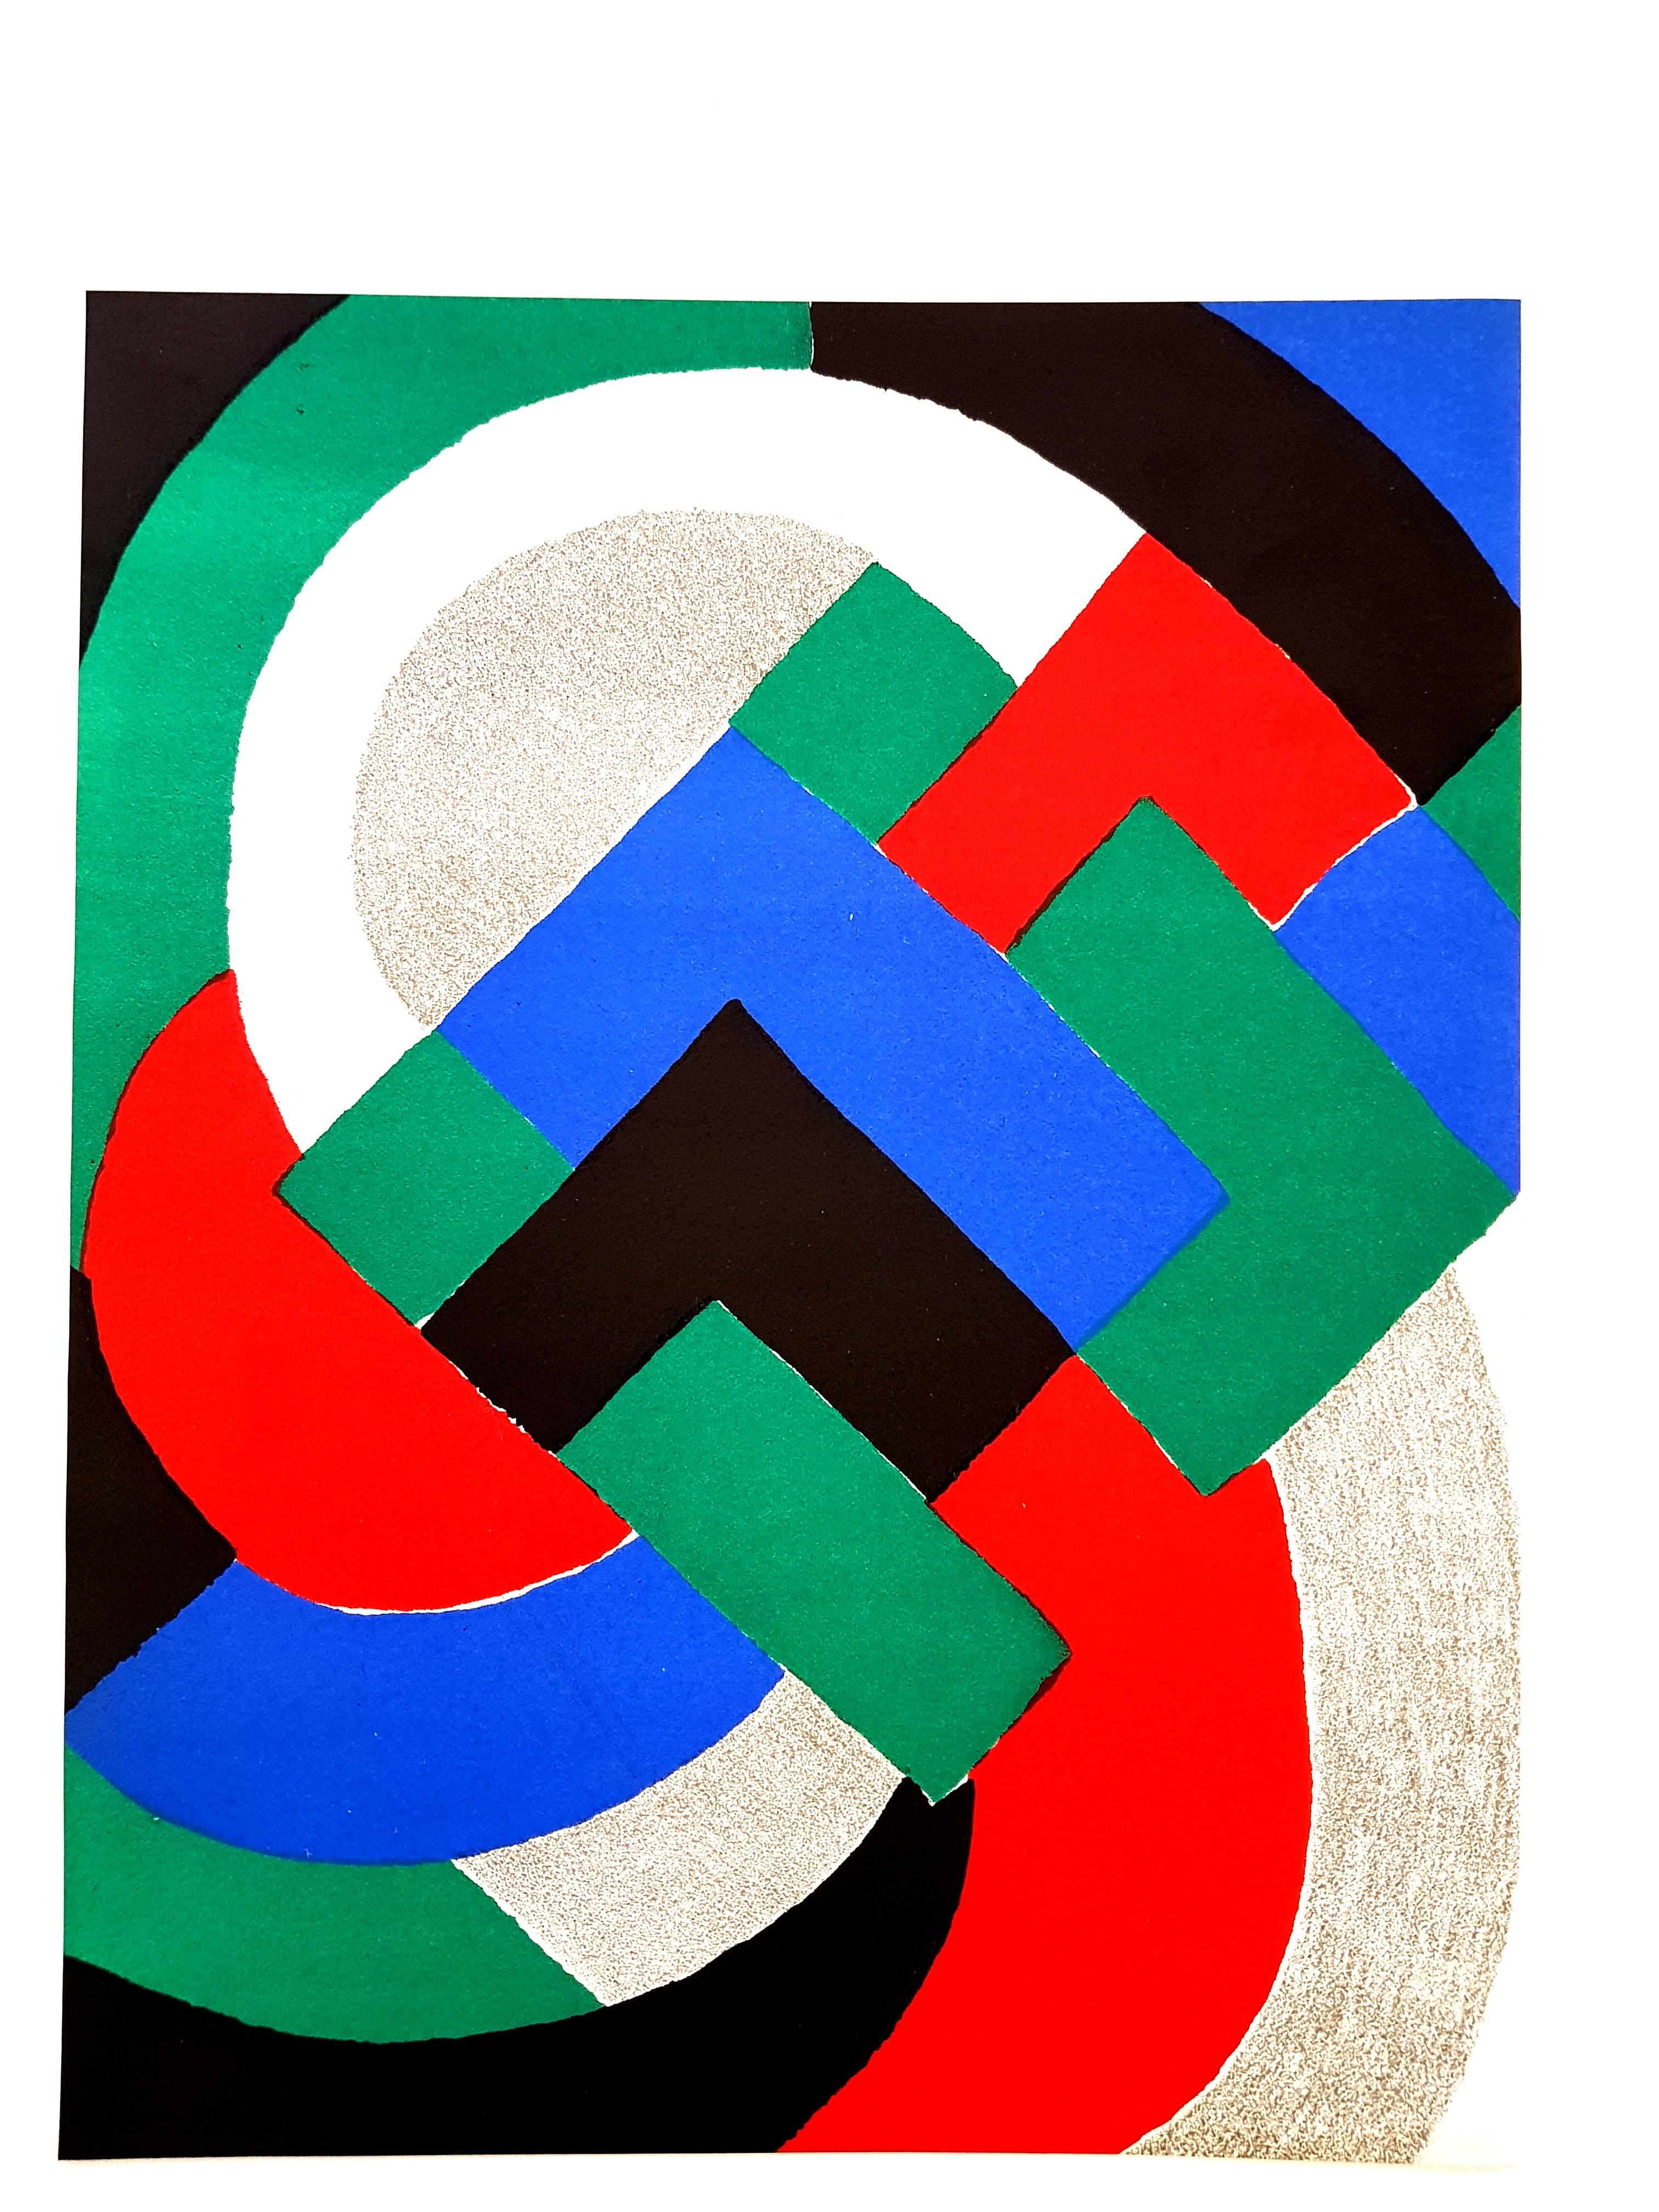 Sonia Delaunay - Composition 
Original Lithograph
1969
Dimensions: 32 x 25 cm
Revue XXe Siècle 
Cahiers d'art published under the direction of G. di San Lazzaro.

Sonia Delaunay was known for her vivid use of color and her bold, abstract patterns,